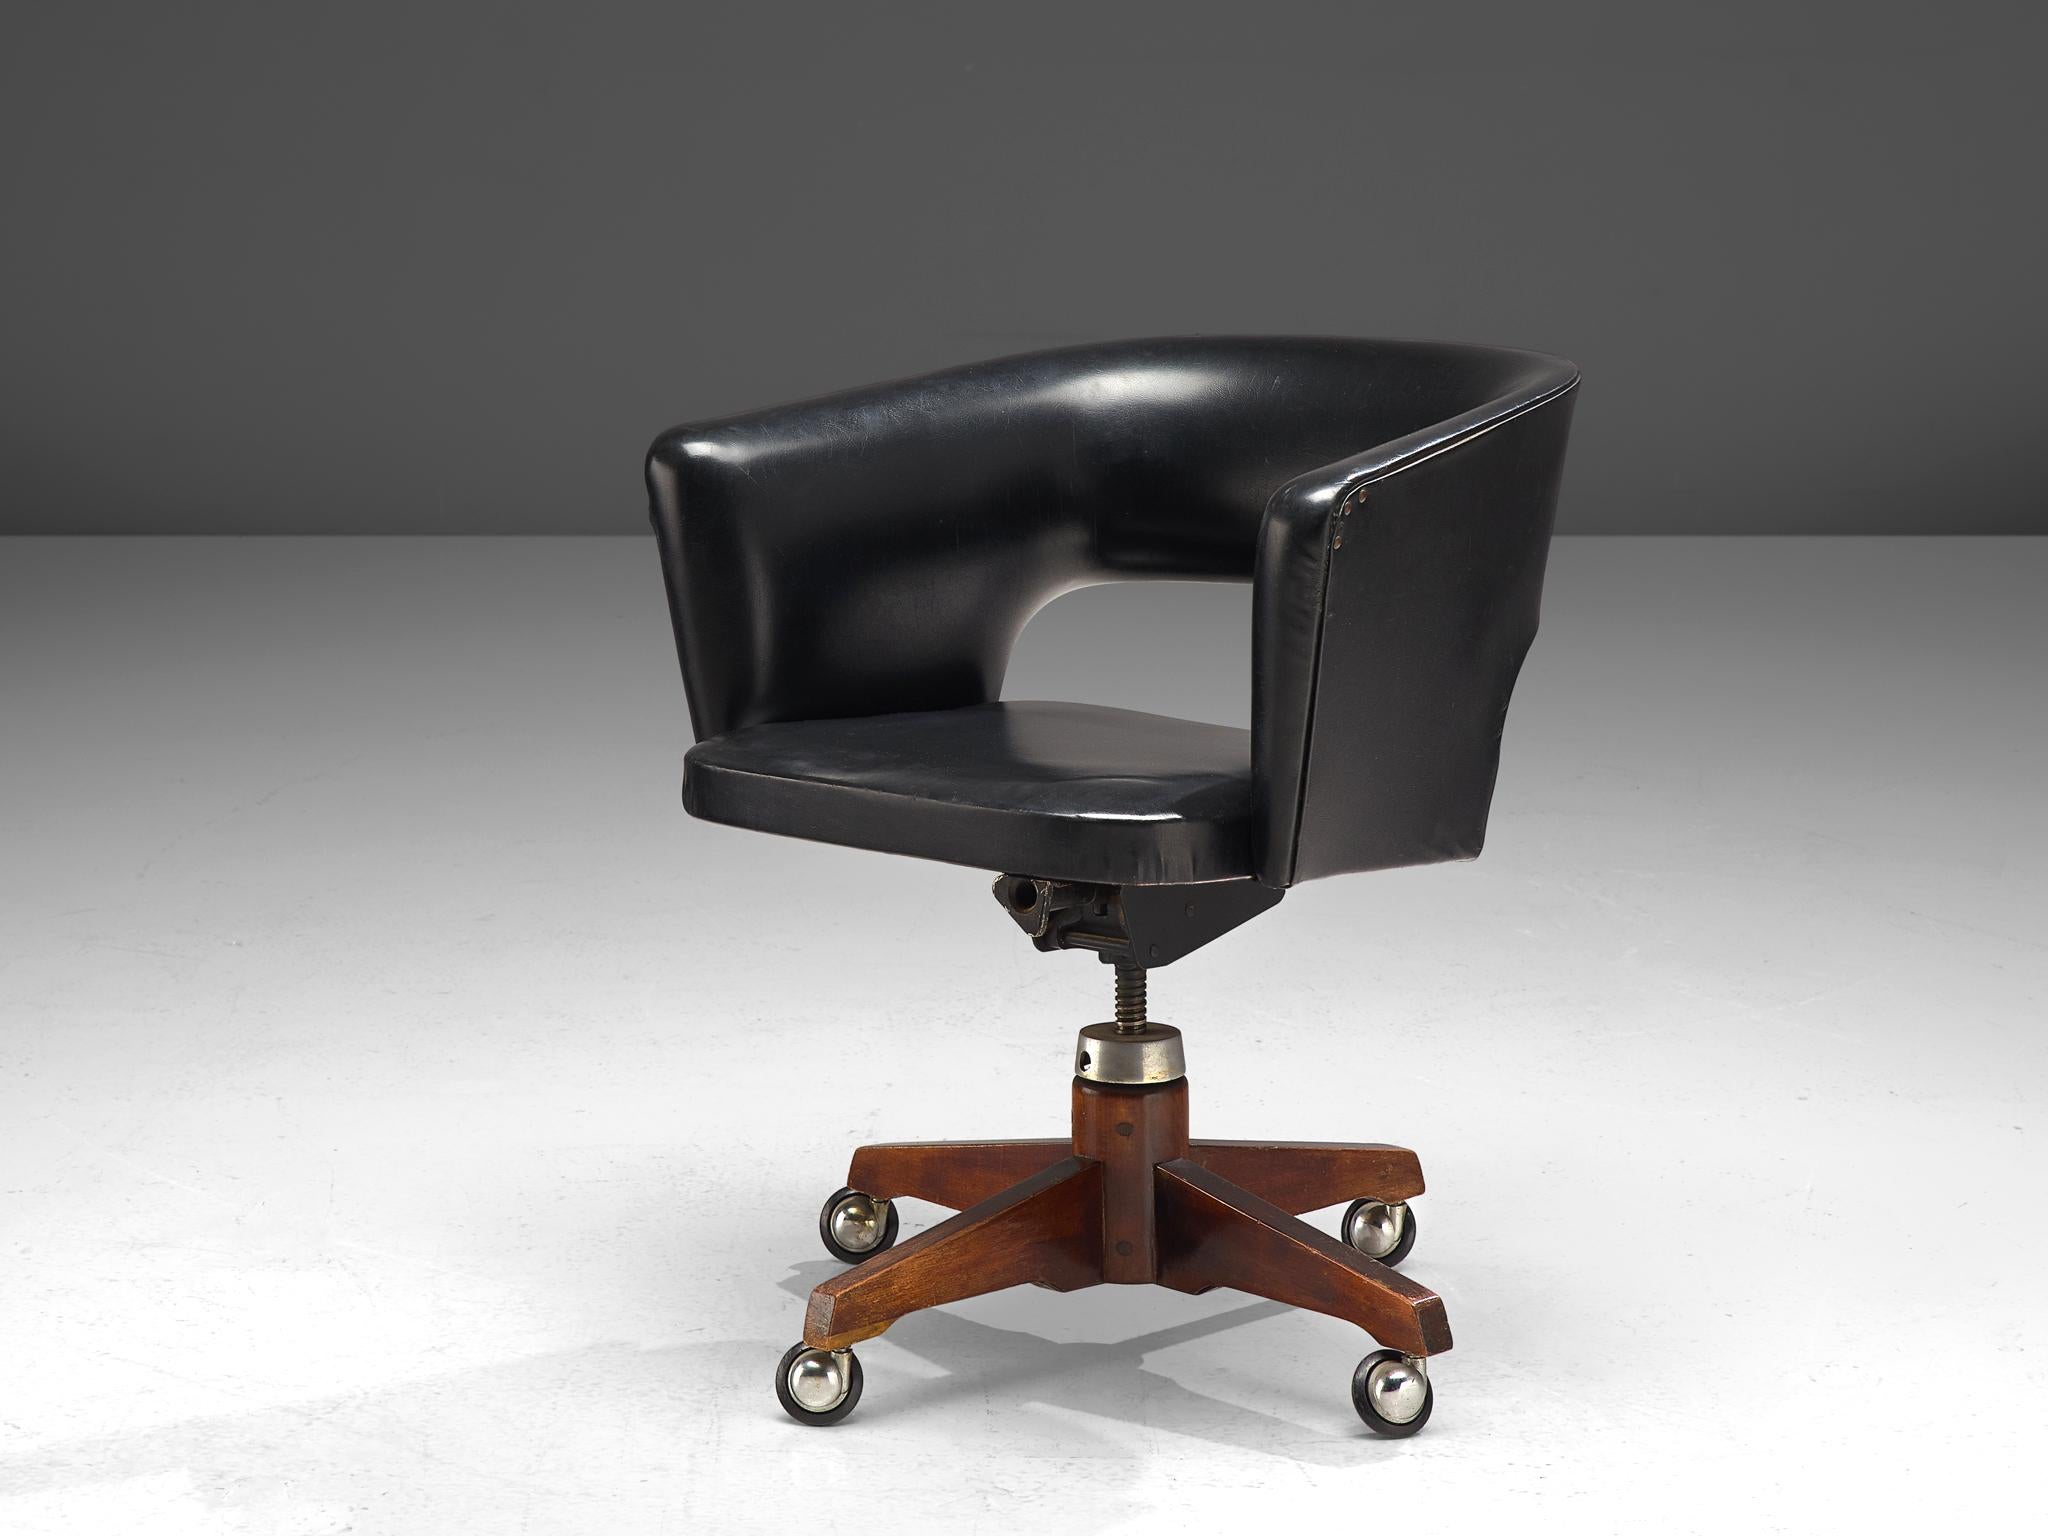 Vittorio Dassi, desk chair, metal, wood and leatherette, Italy, 1950s

Early swivel desk chair, designed by Vittorio Dassi. The seat cosists of a highback that flows over in the arms. The legs are made of wood with castered wheels, which makes